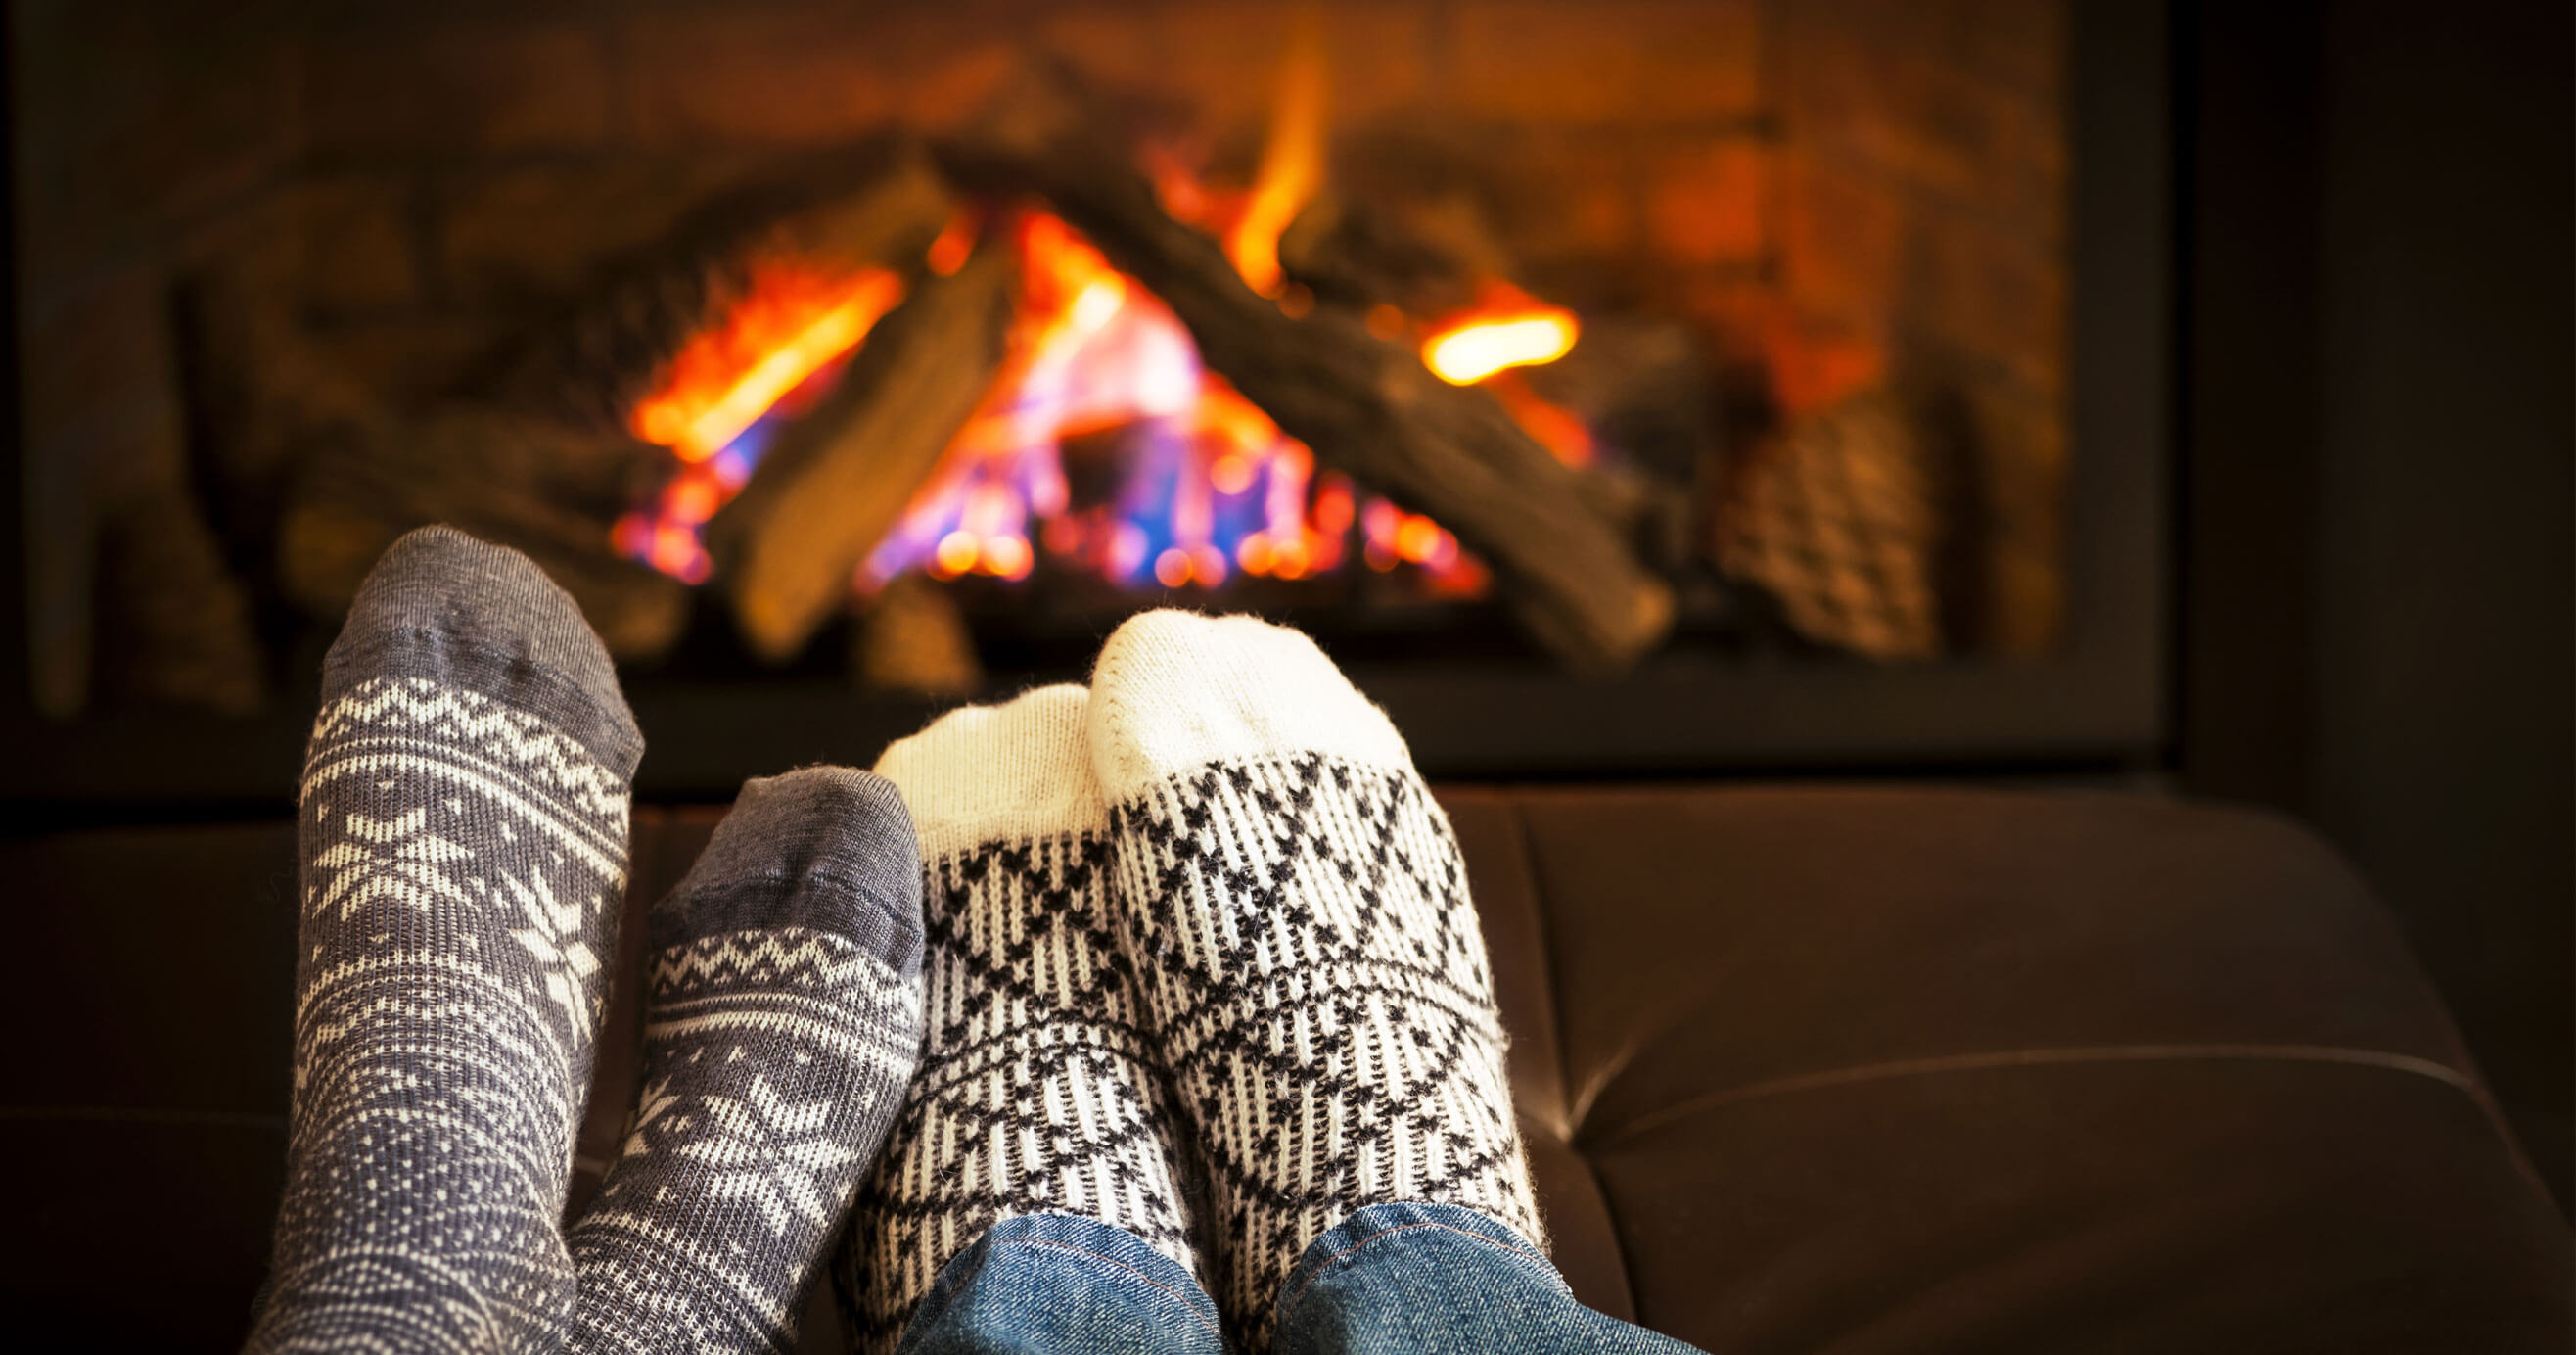 A couple putting their feet up by the warm fire.